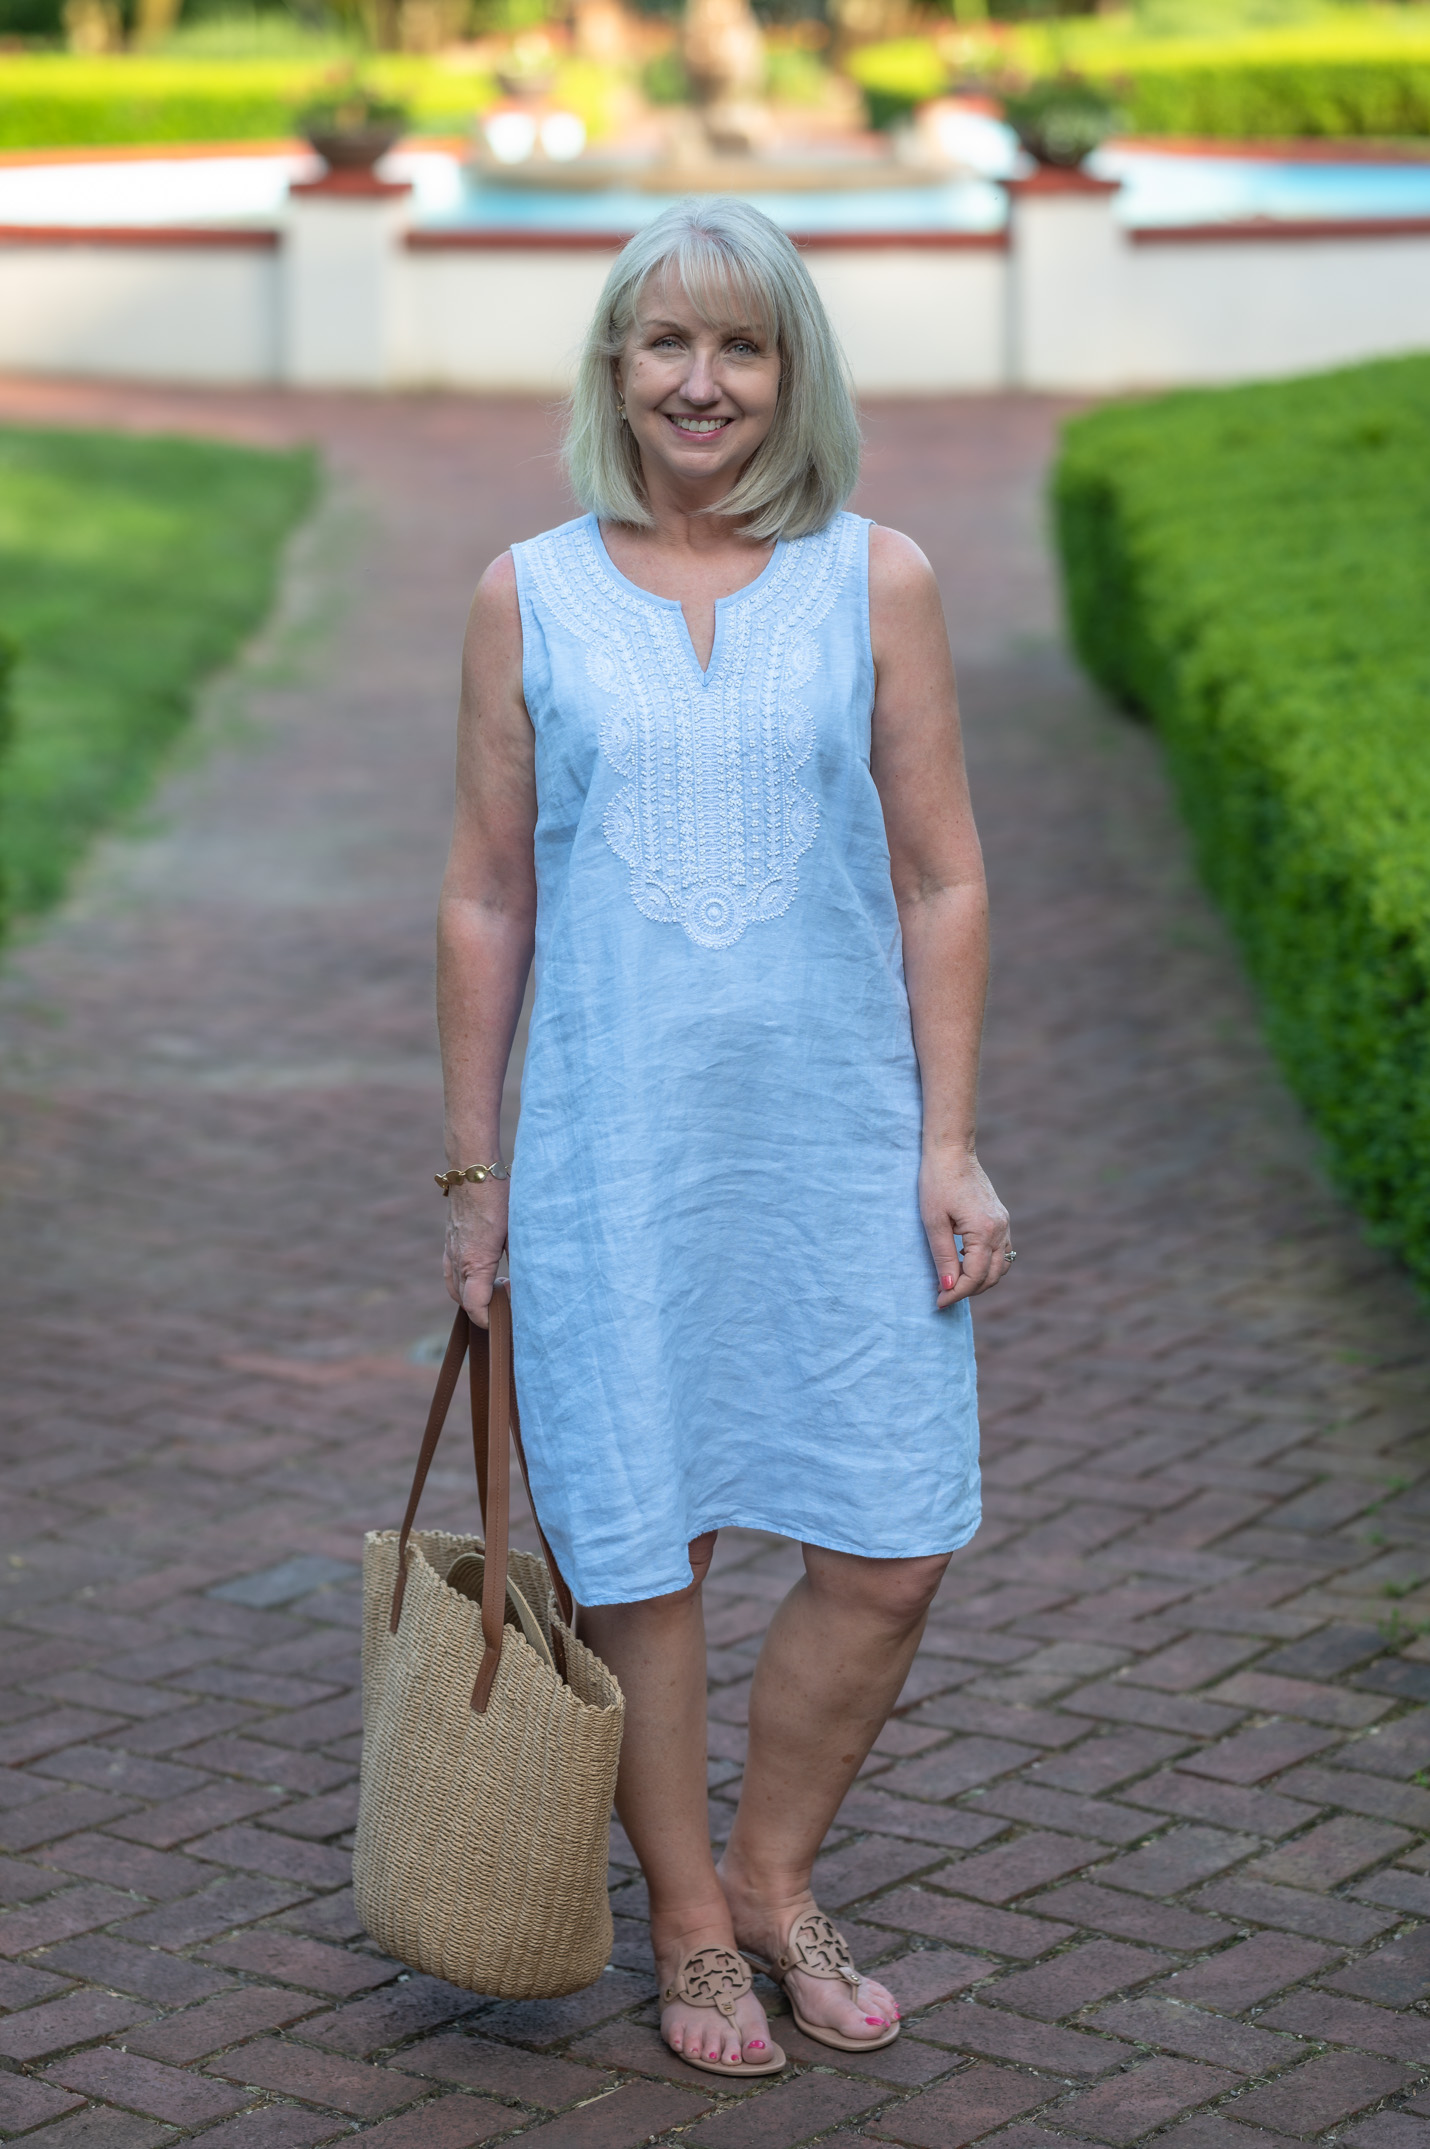 Linen Dress for a Hot and Humid Day